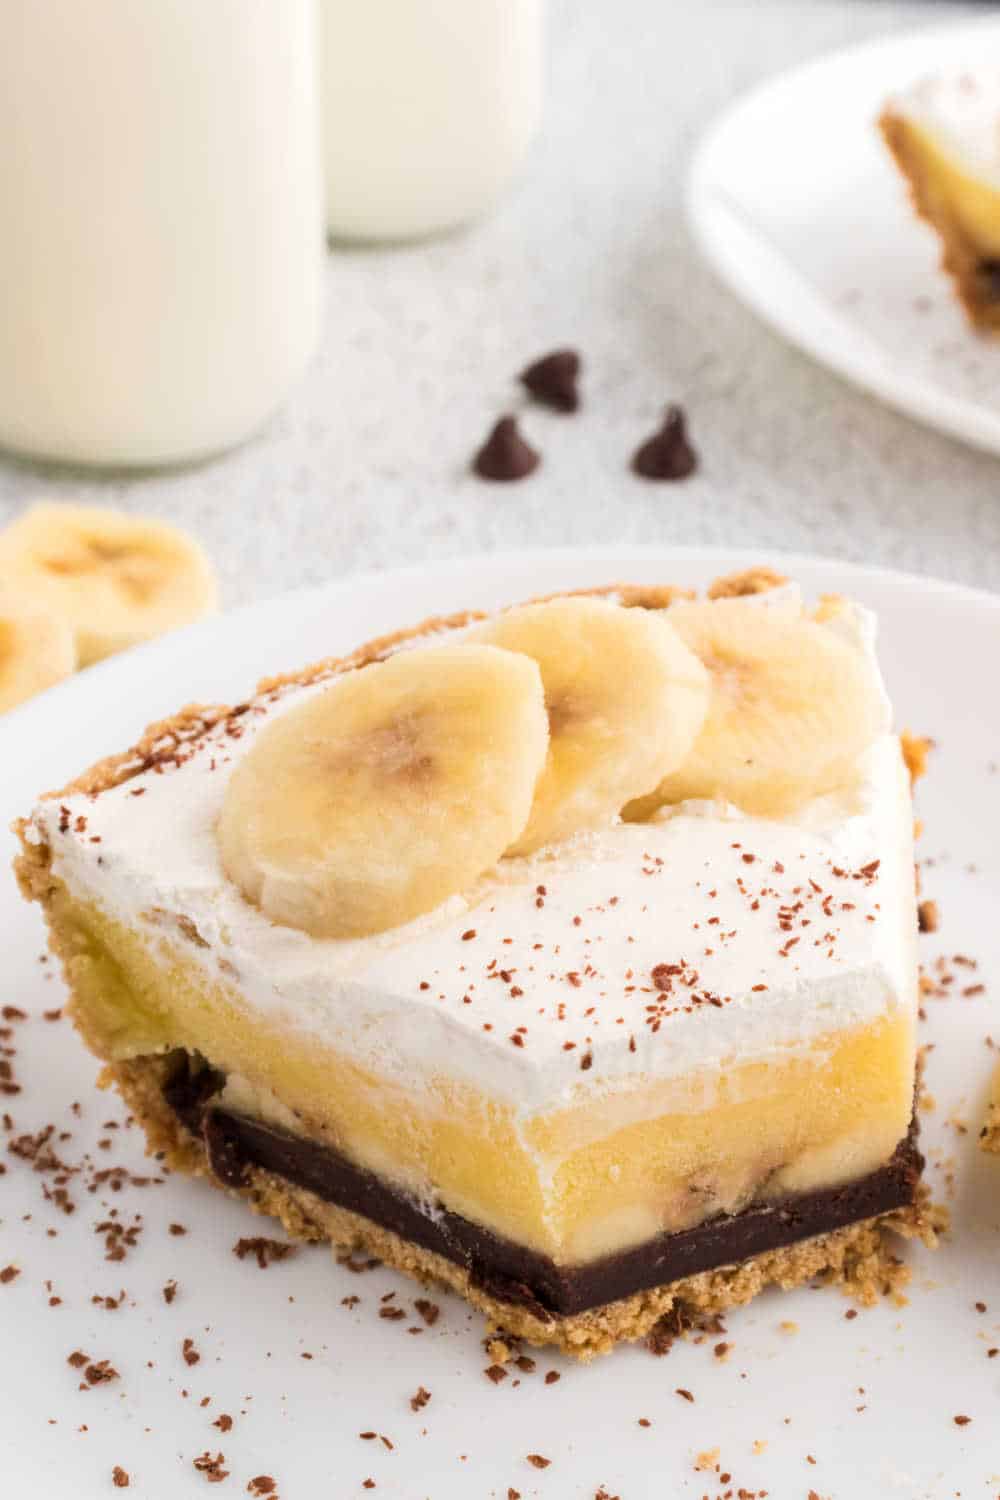 A slice of black bottom banana cream pie on a plate with a bite off the end.